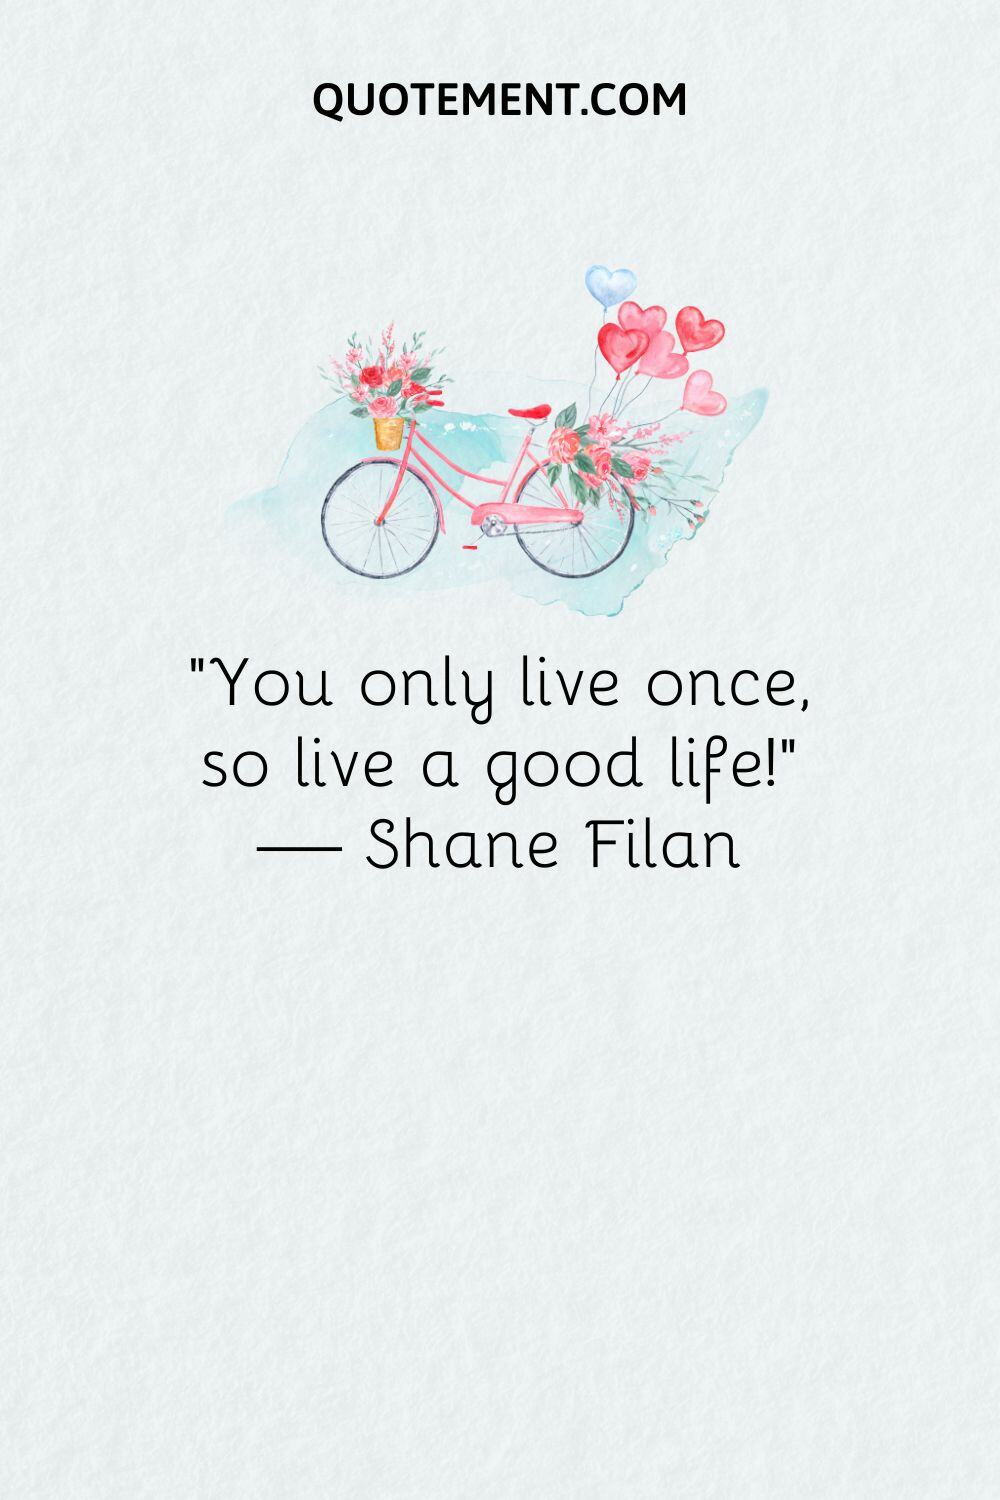 image of a bicycle with flowers and balloons representing top you only live once quote